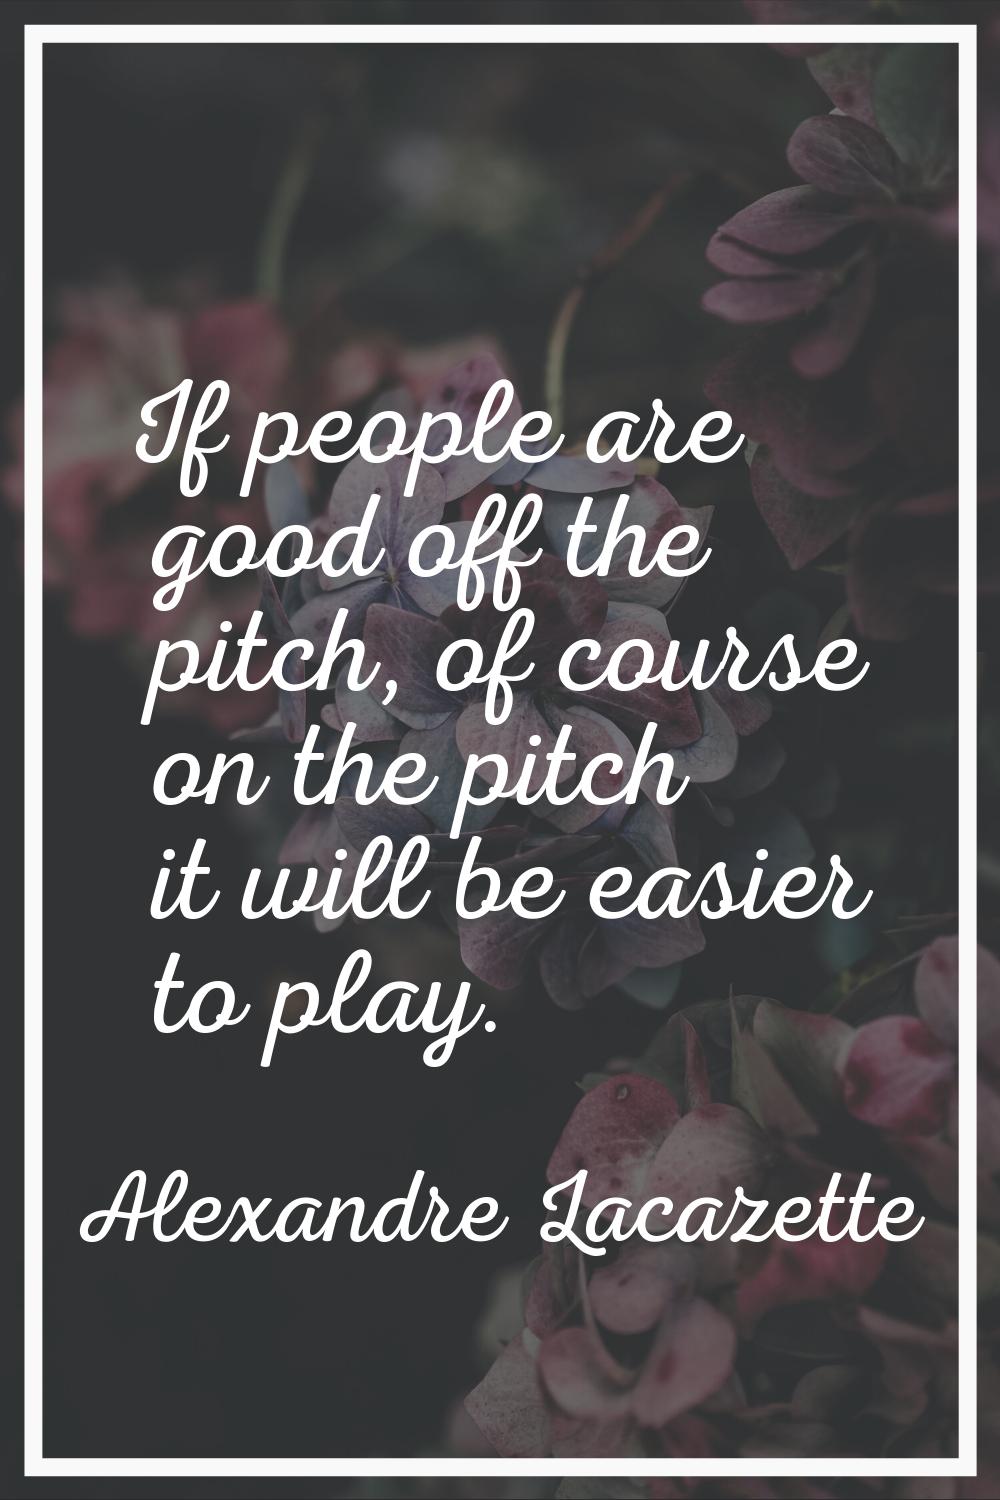 If people are good off the pitch, of course on the pitch it will be easier to play.